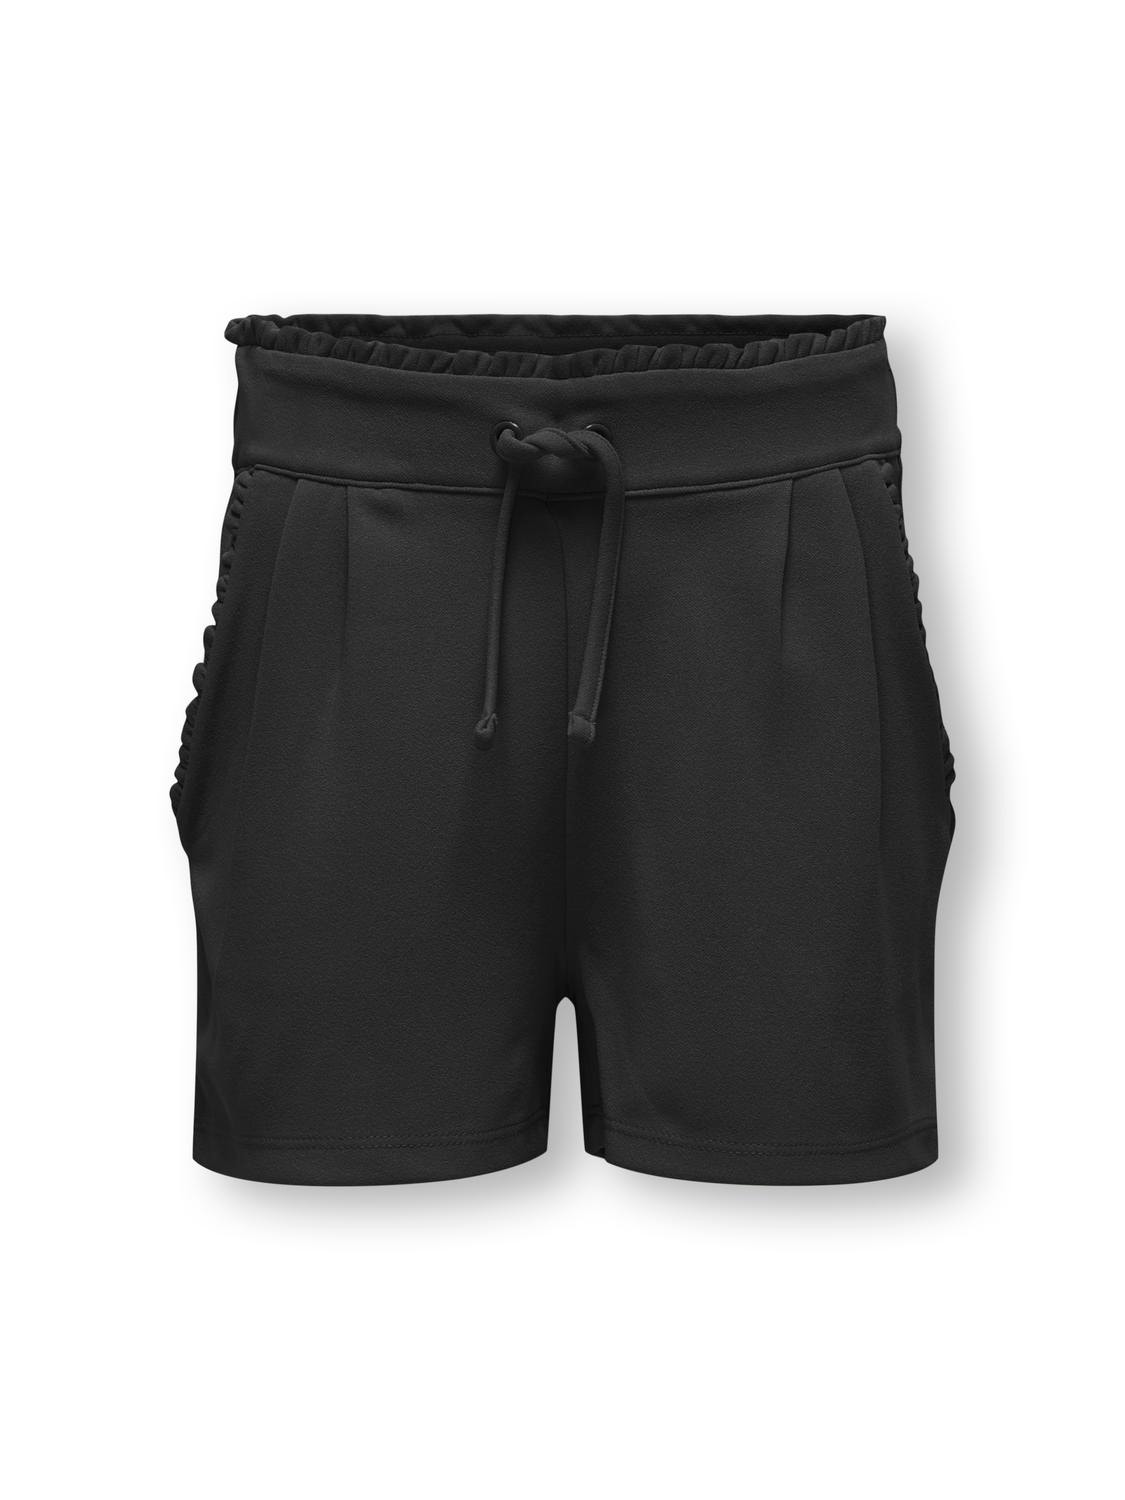 ONLY Normal passform Shorts -Black - 15291517